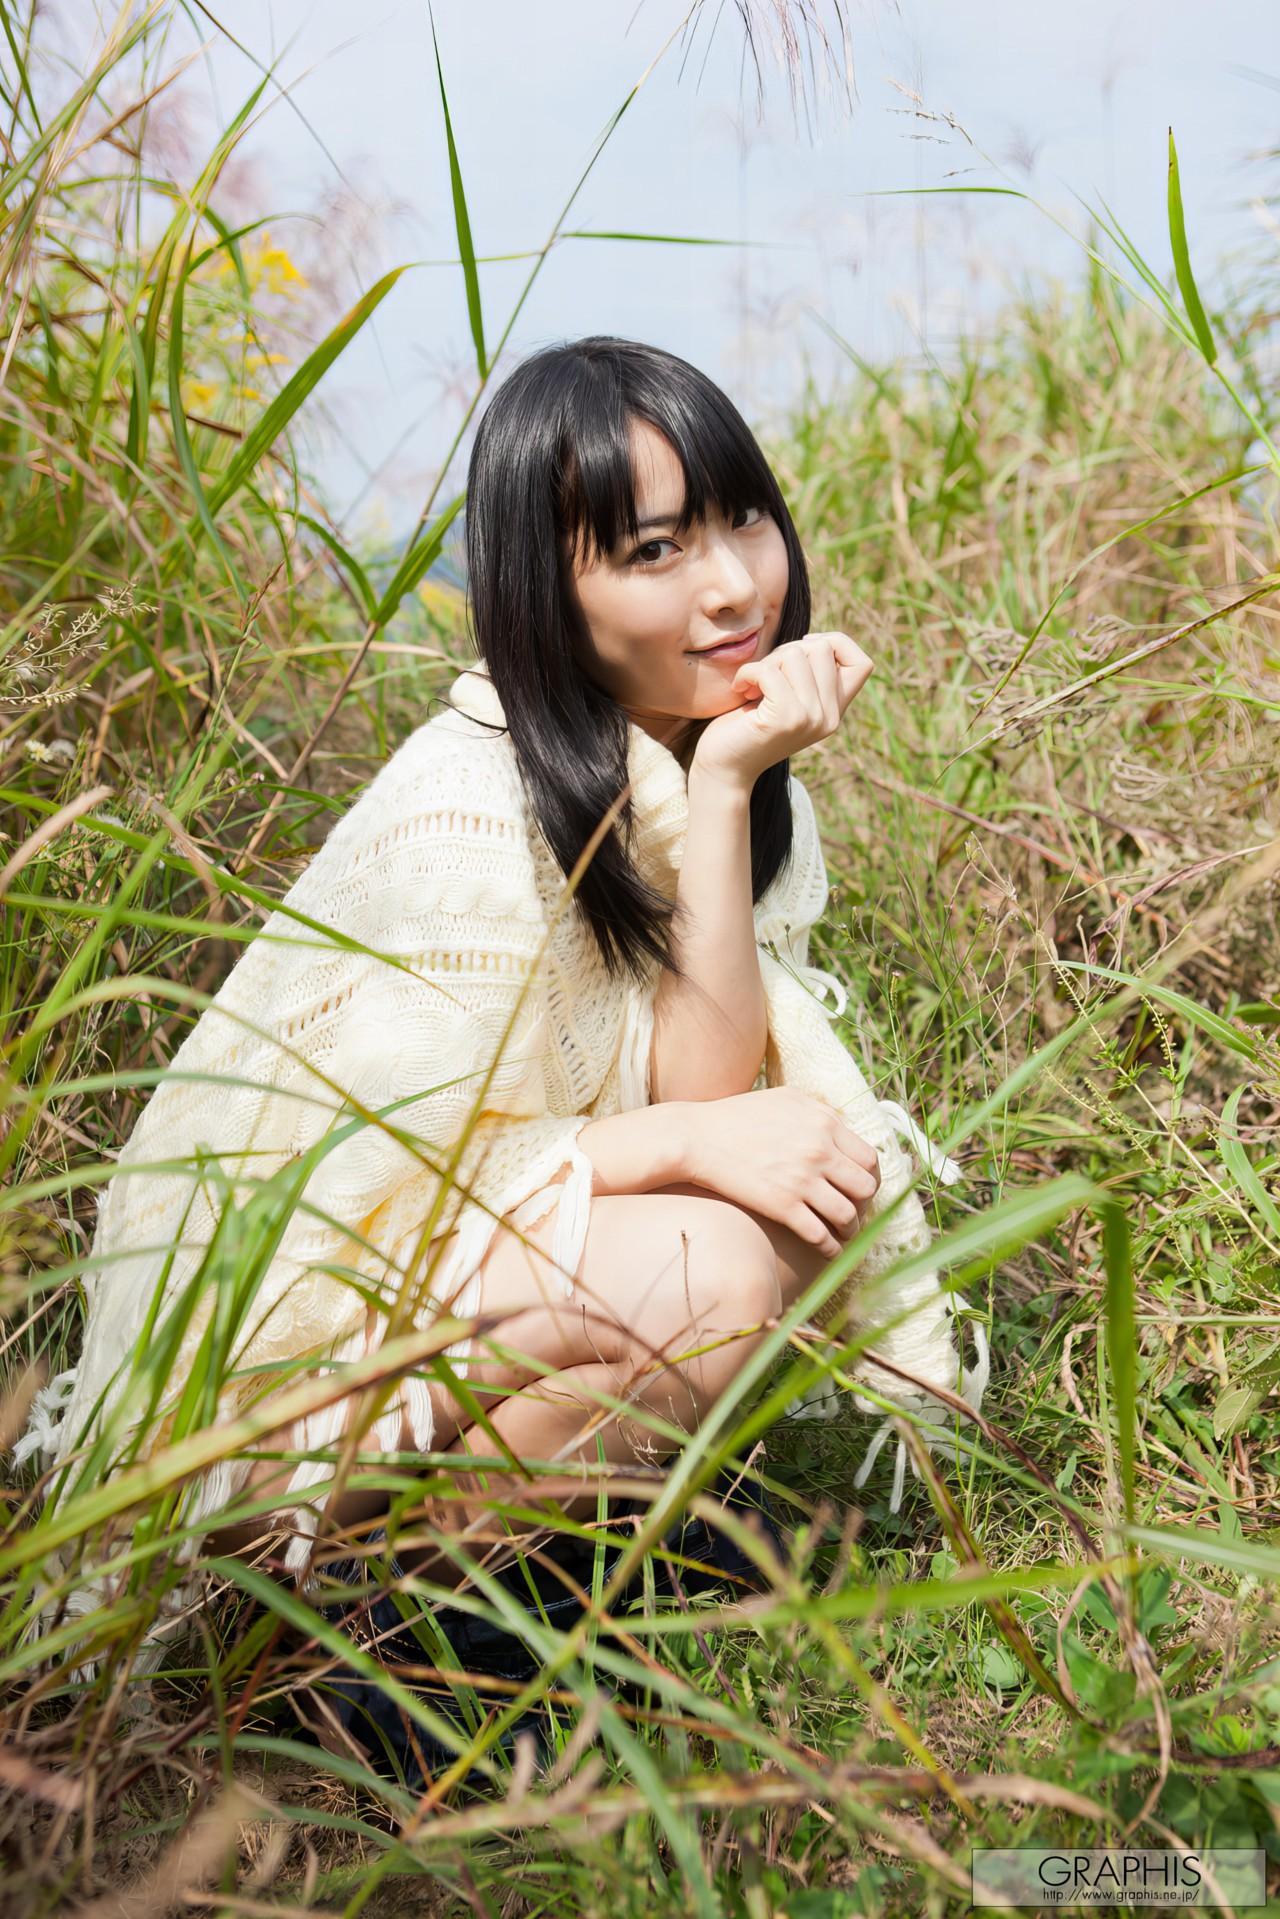 Kana Yume 由愛可奈, Graphis Special Contents [A to Z] Vol.01(7)